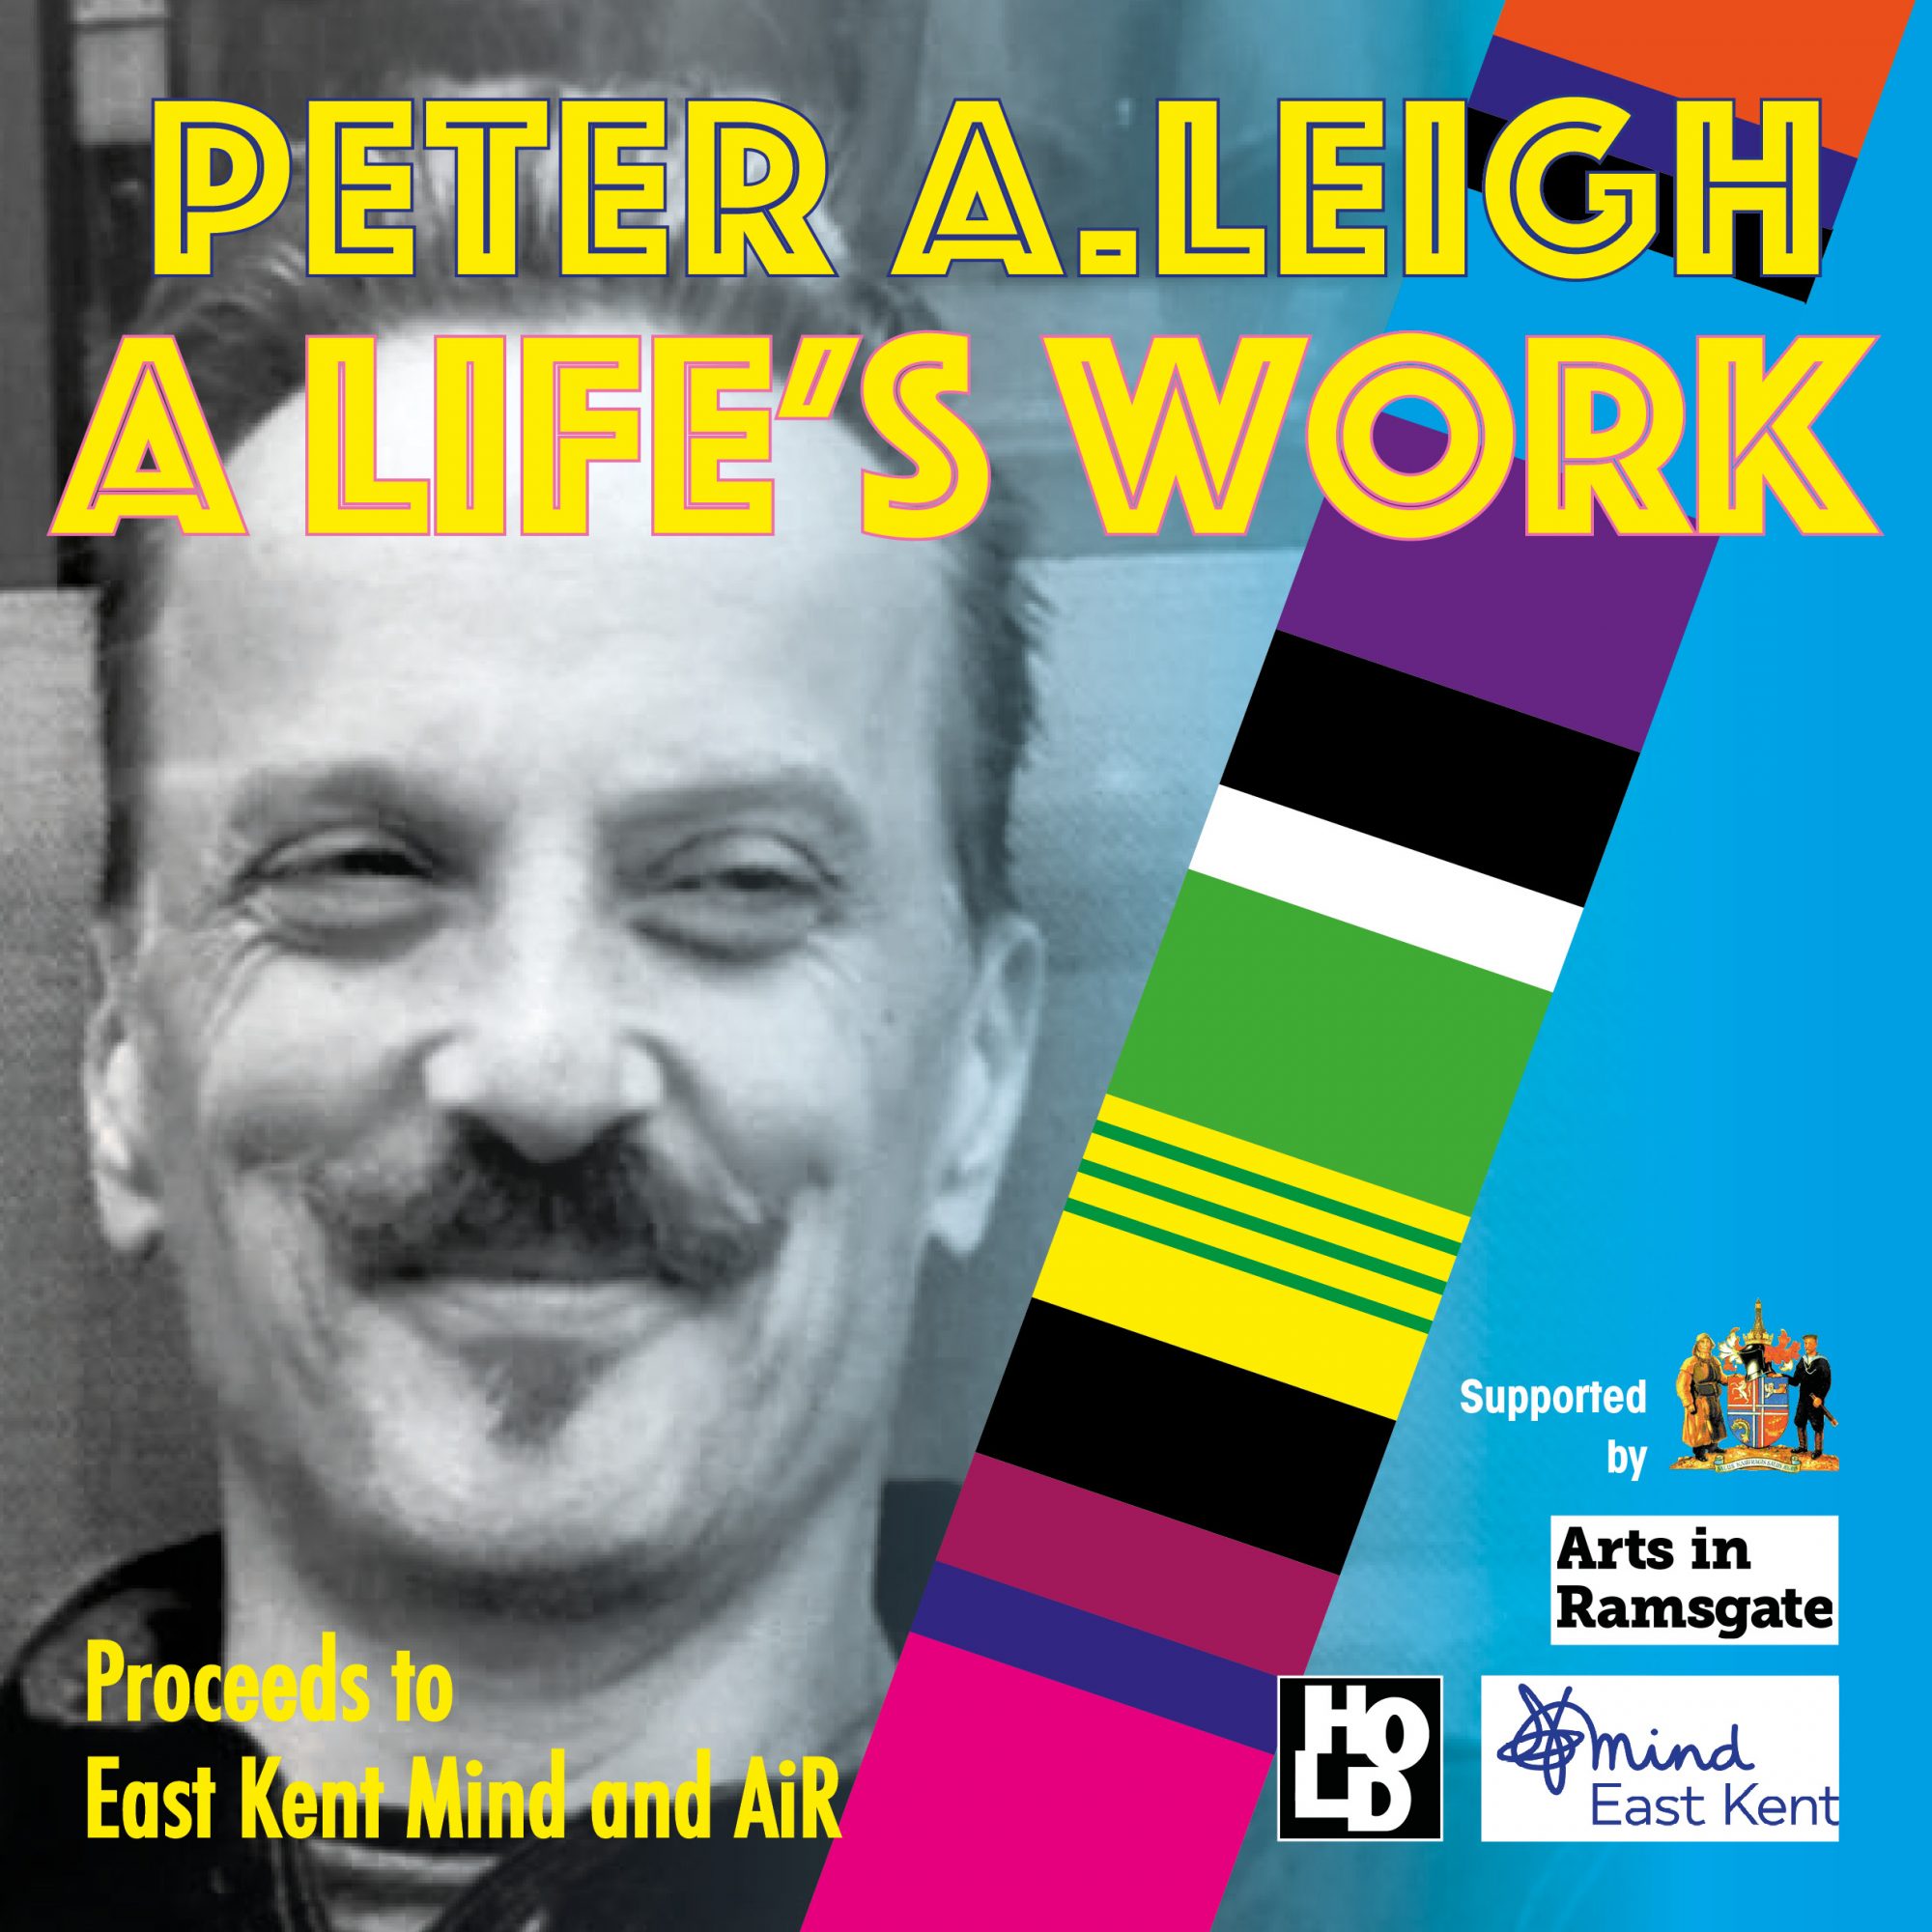 Exhibitions to celebrate the life of Ramsgate artist Peter A Leigh ...